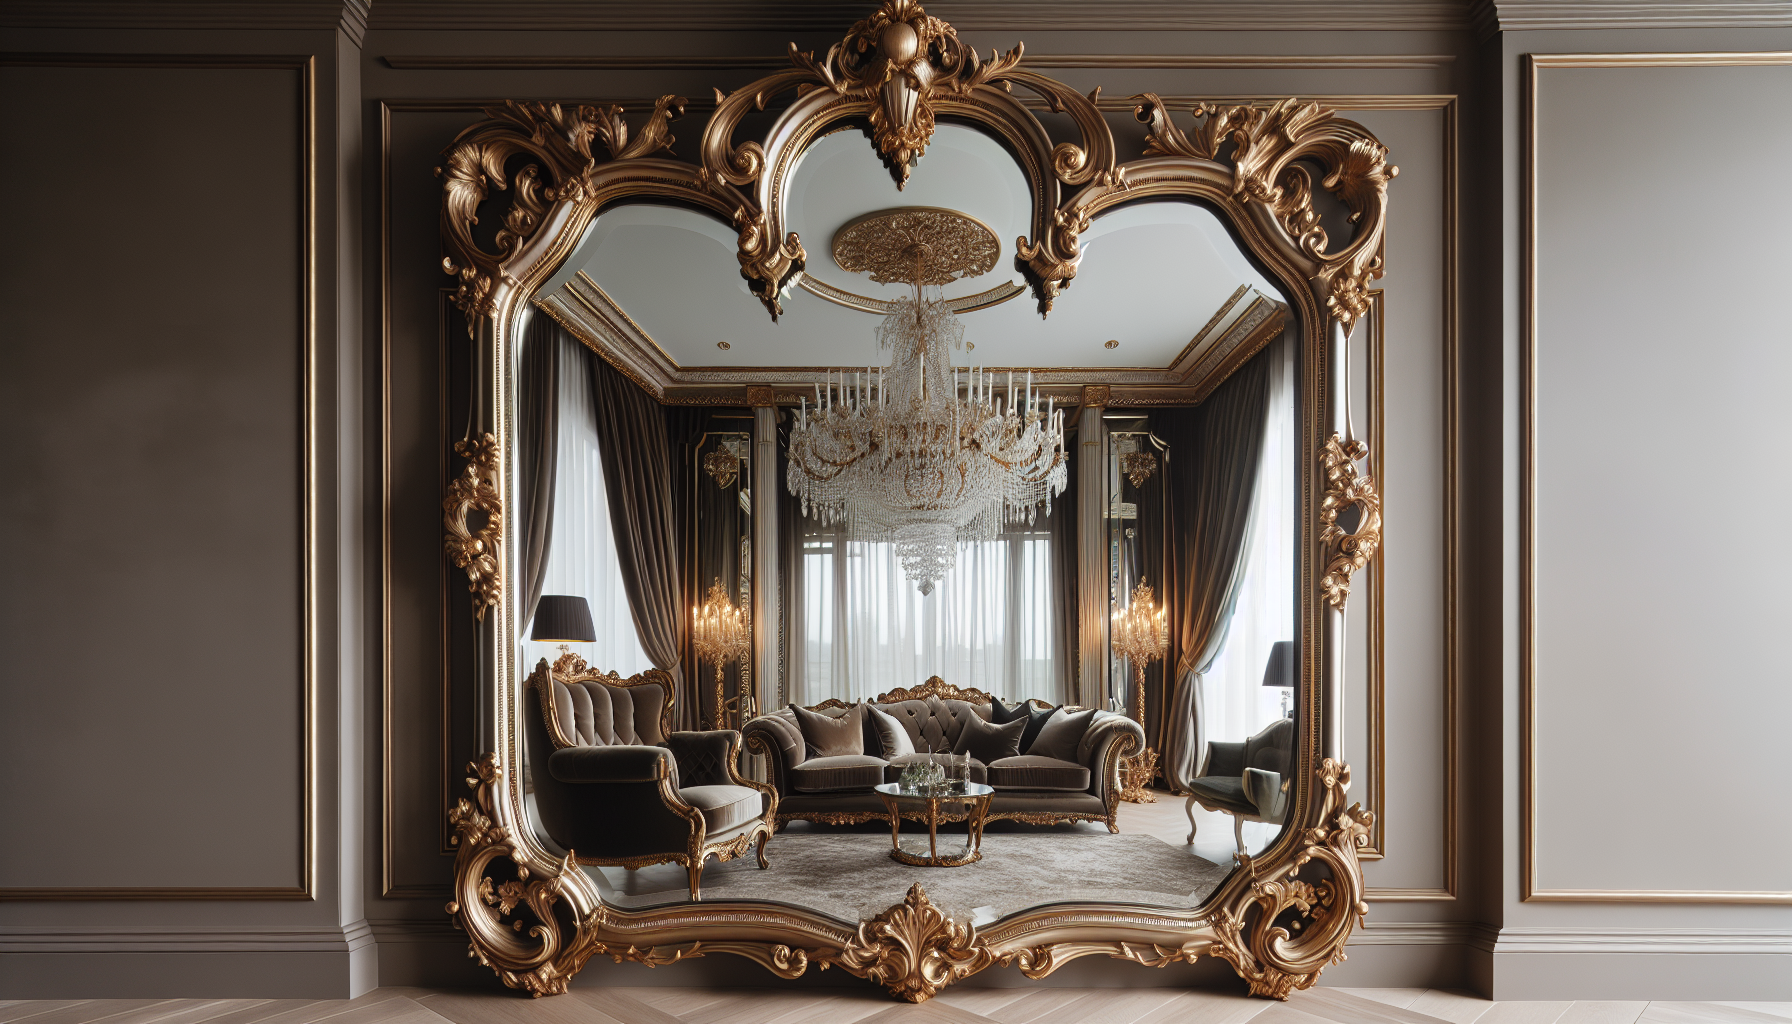 Statement mirror as a high-end accessory in a living room